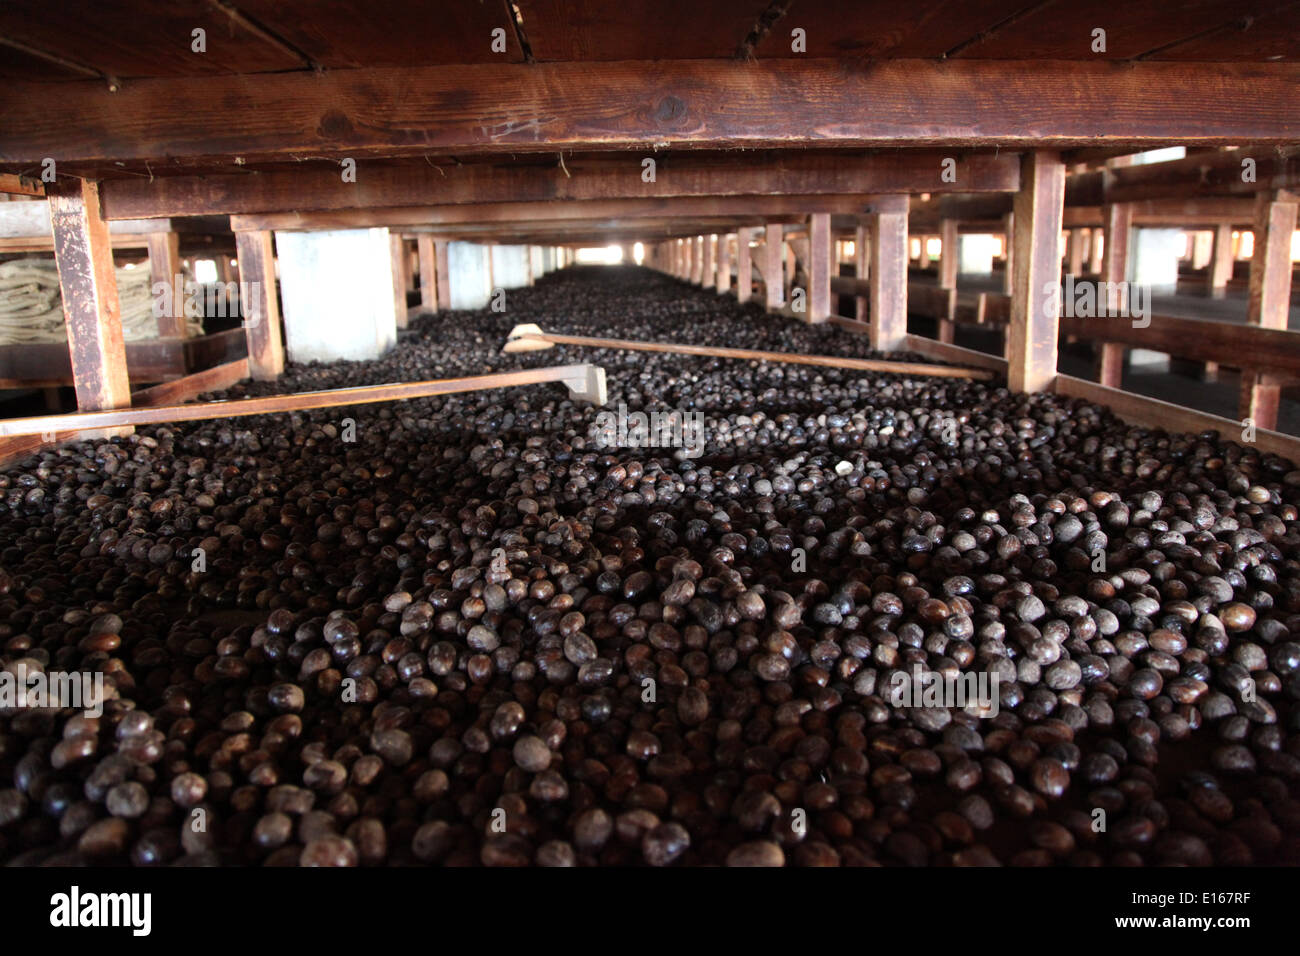 Nutmegs in giant racks drying in a warehouse Stock Photo